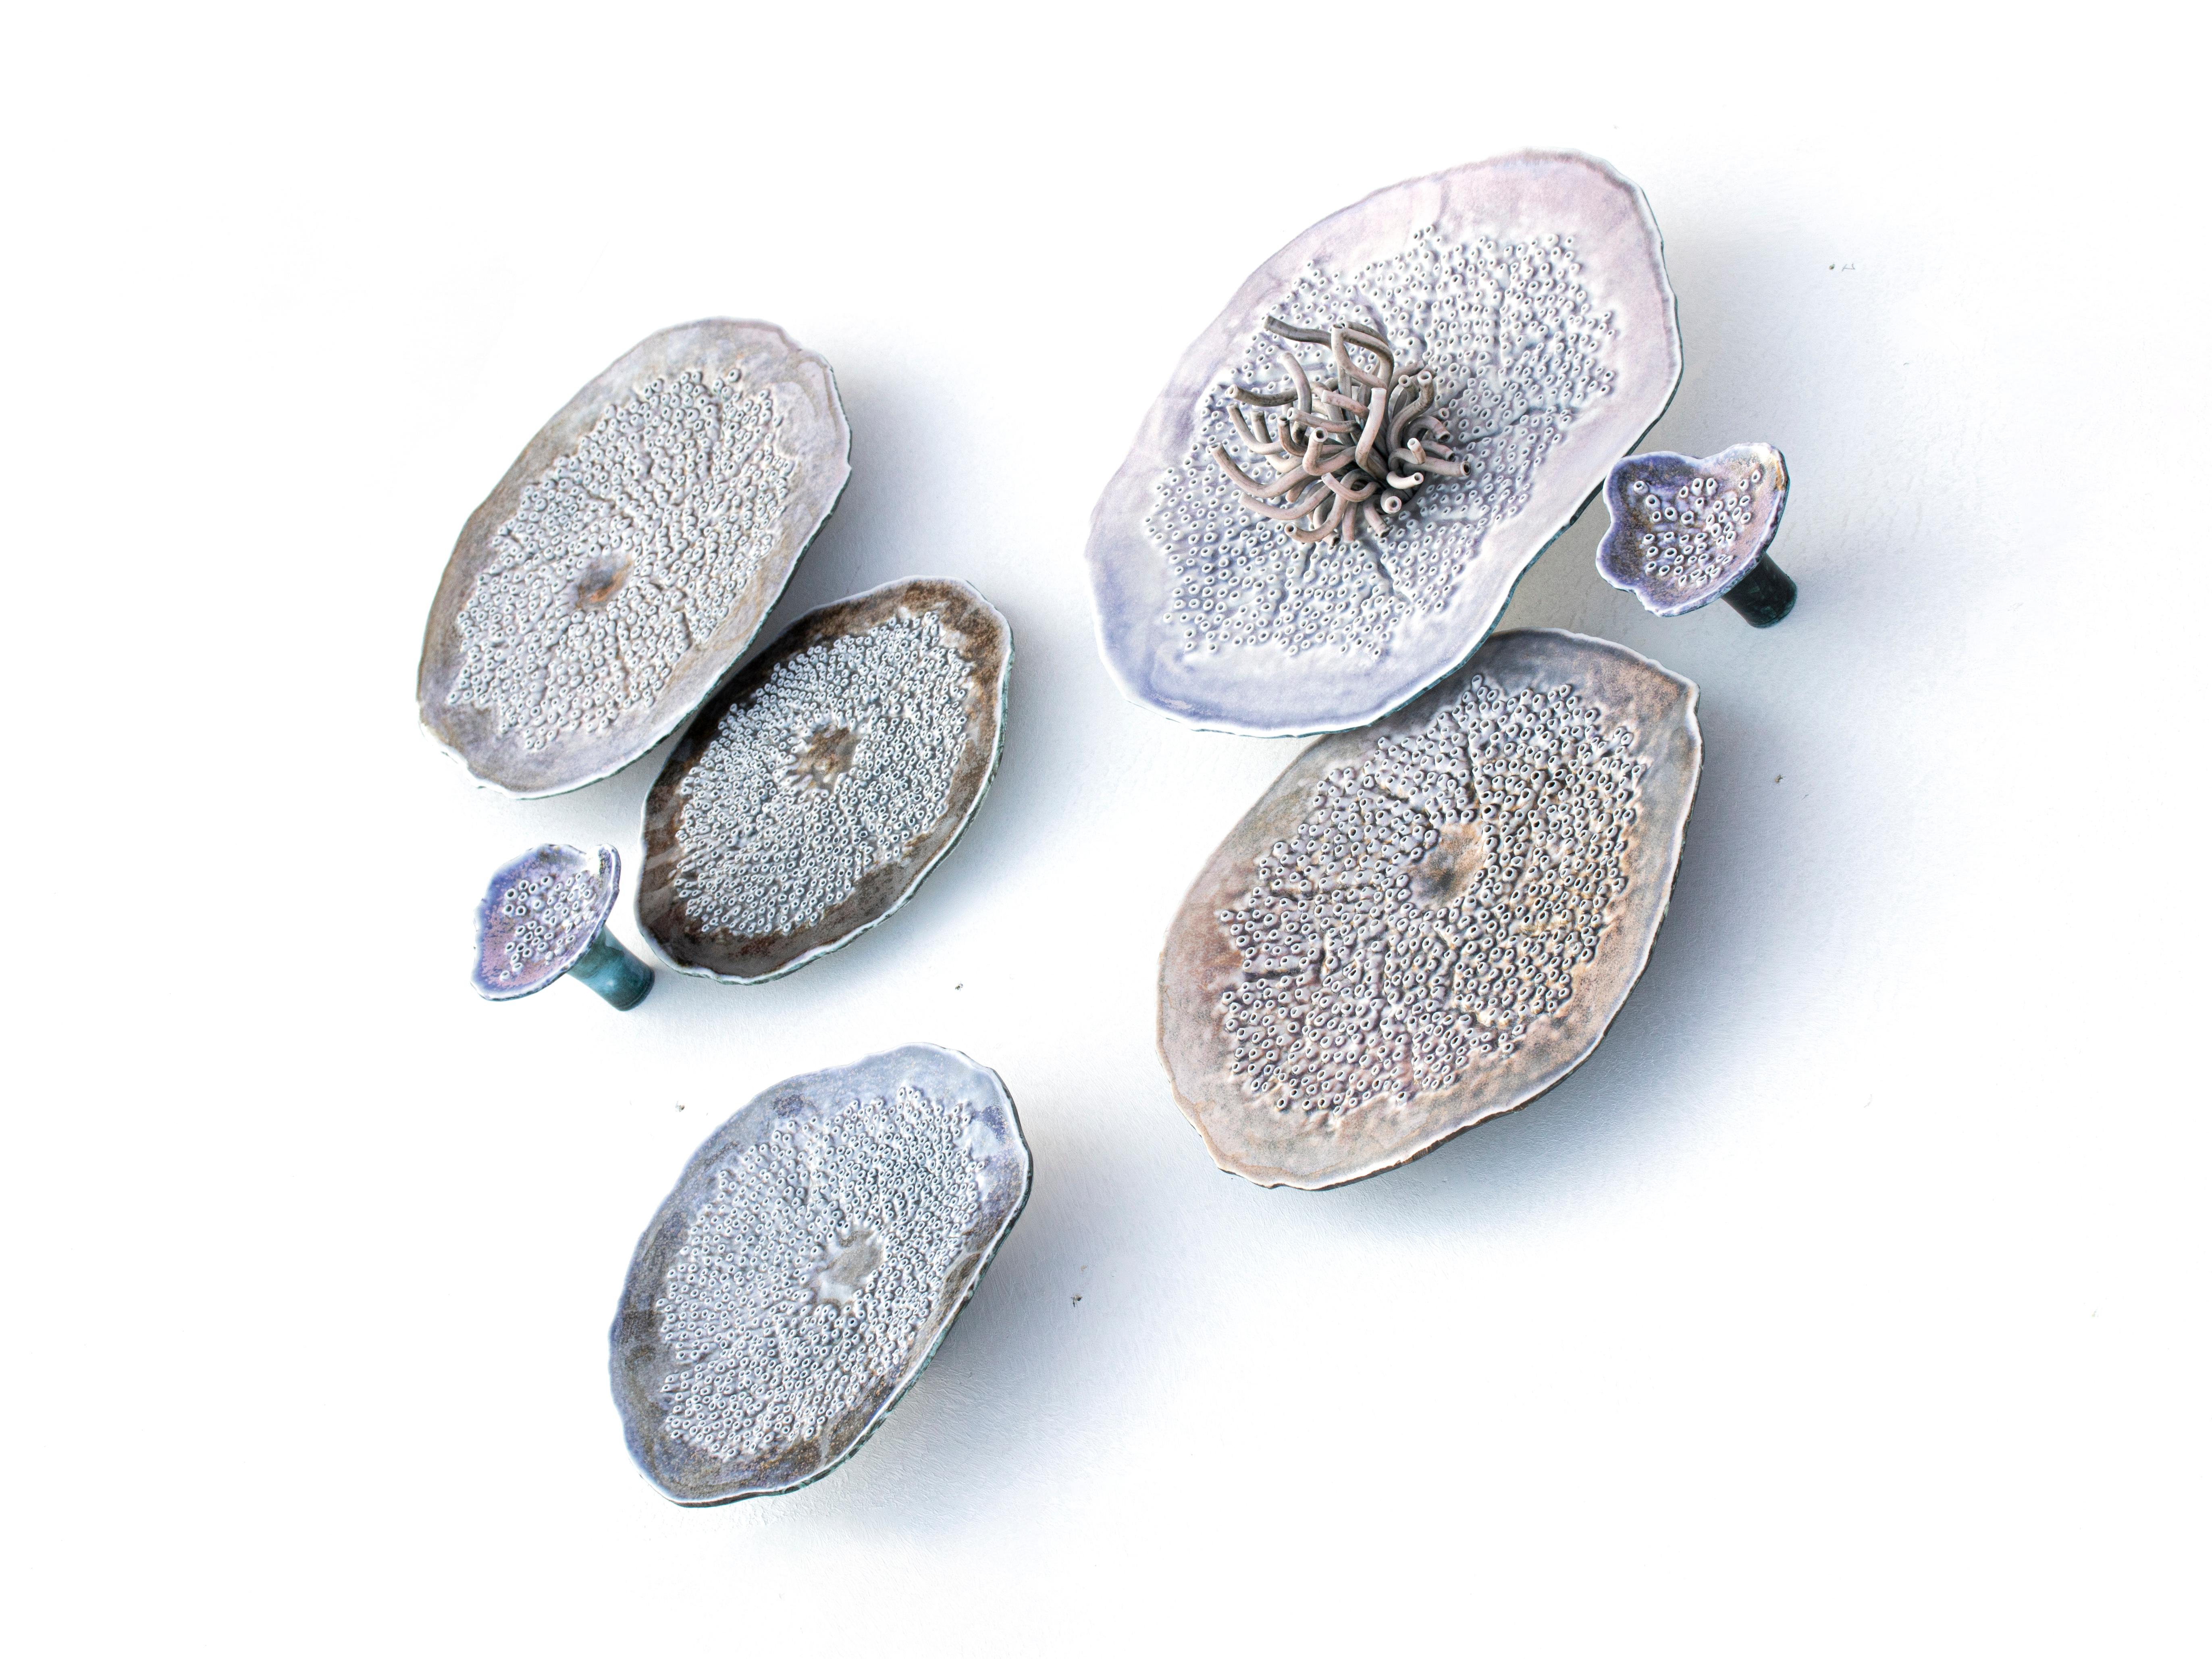 Set of 7 different wall decoration plates, including the screws to hang them on wall.

PORIFERA Collection by FOS is an hymn to the beauty of marine world, with a myriad of tiny holes to explore by touch.
The texture, inspired by corals,